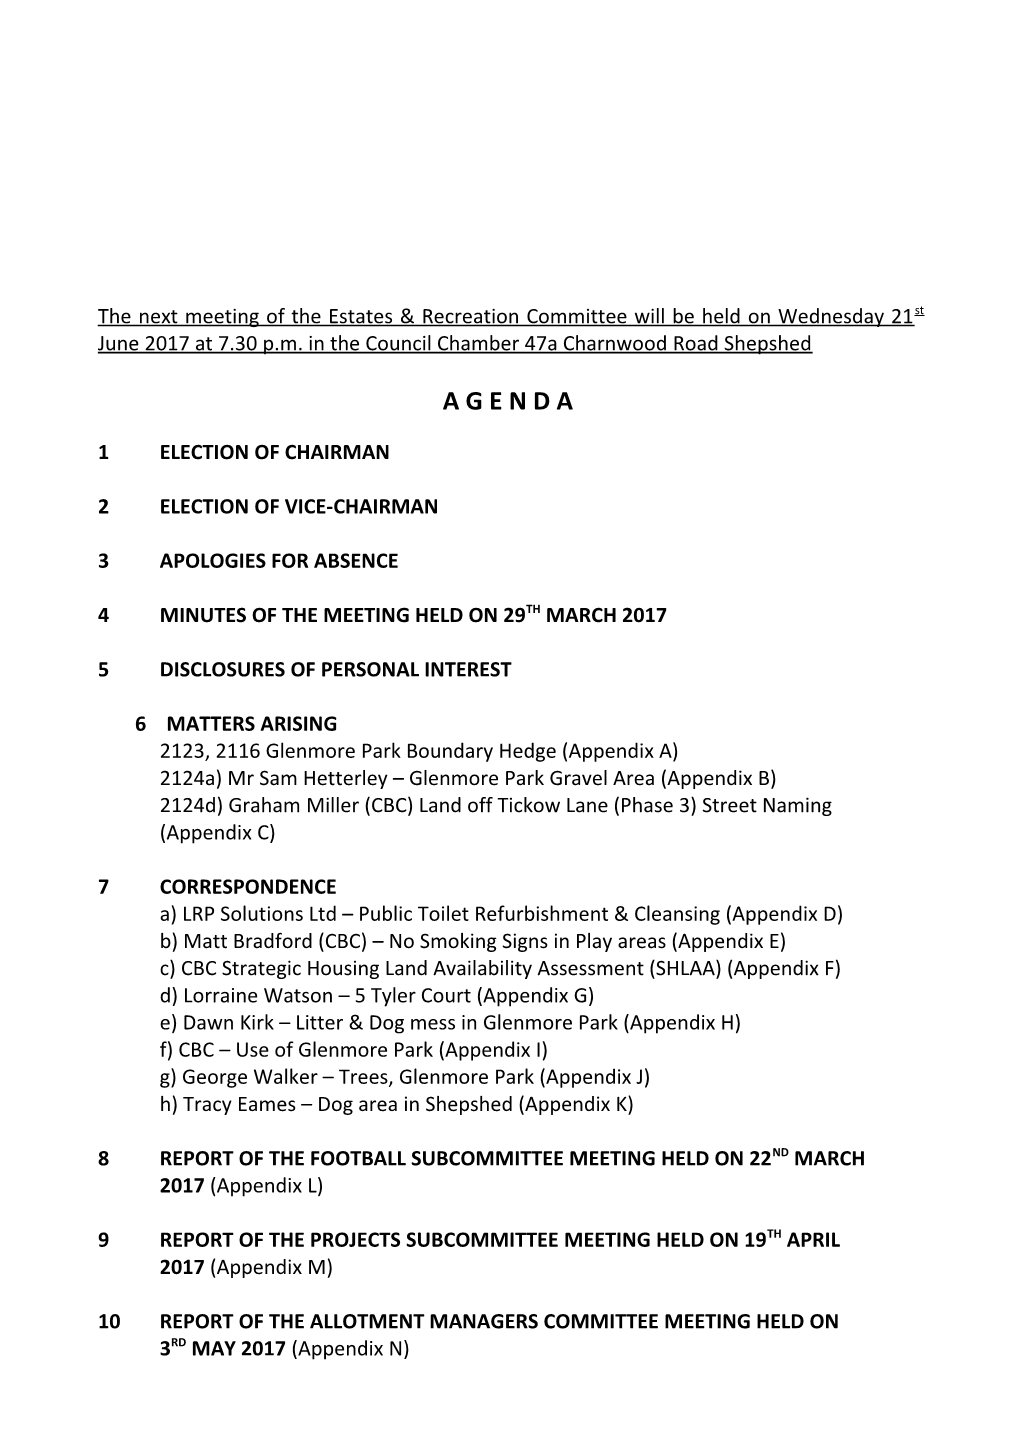 The Next Meeting of the Estates & Recreation Committee Will Be Held on Wednesday 24Th August